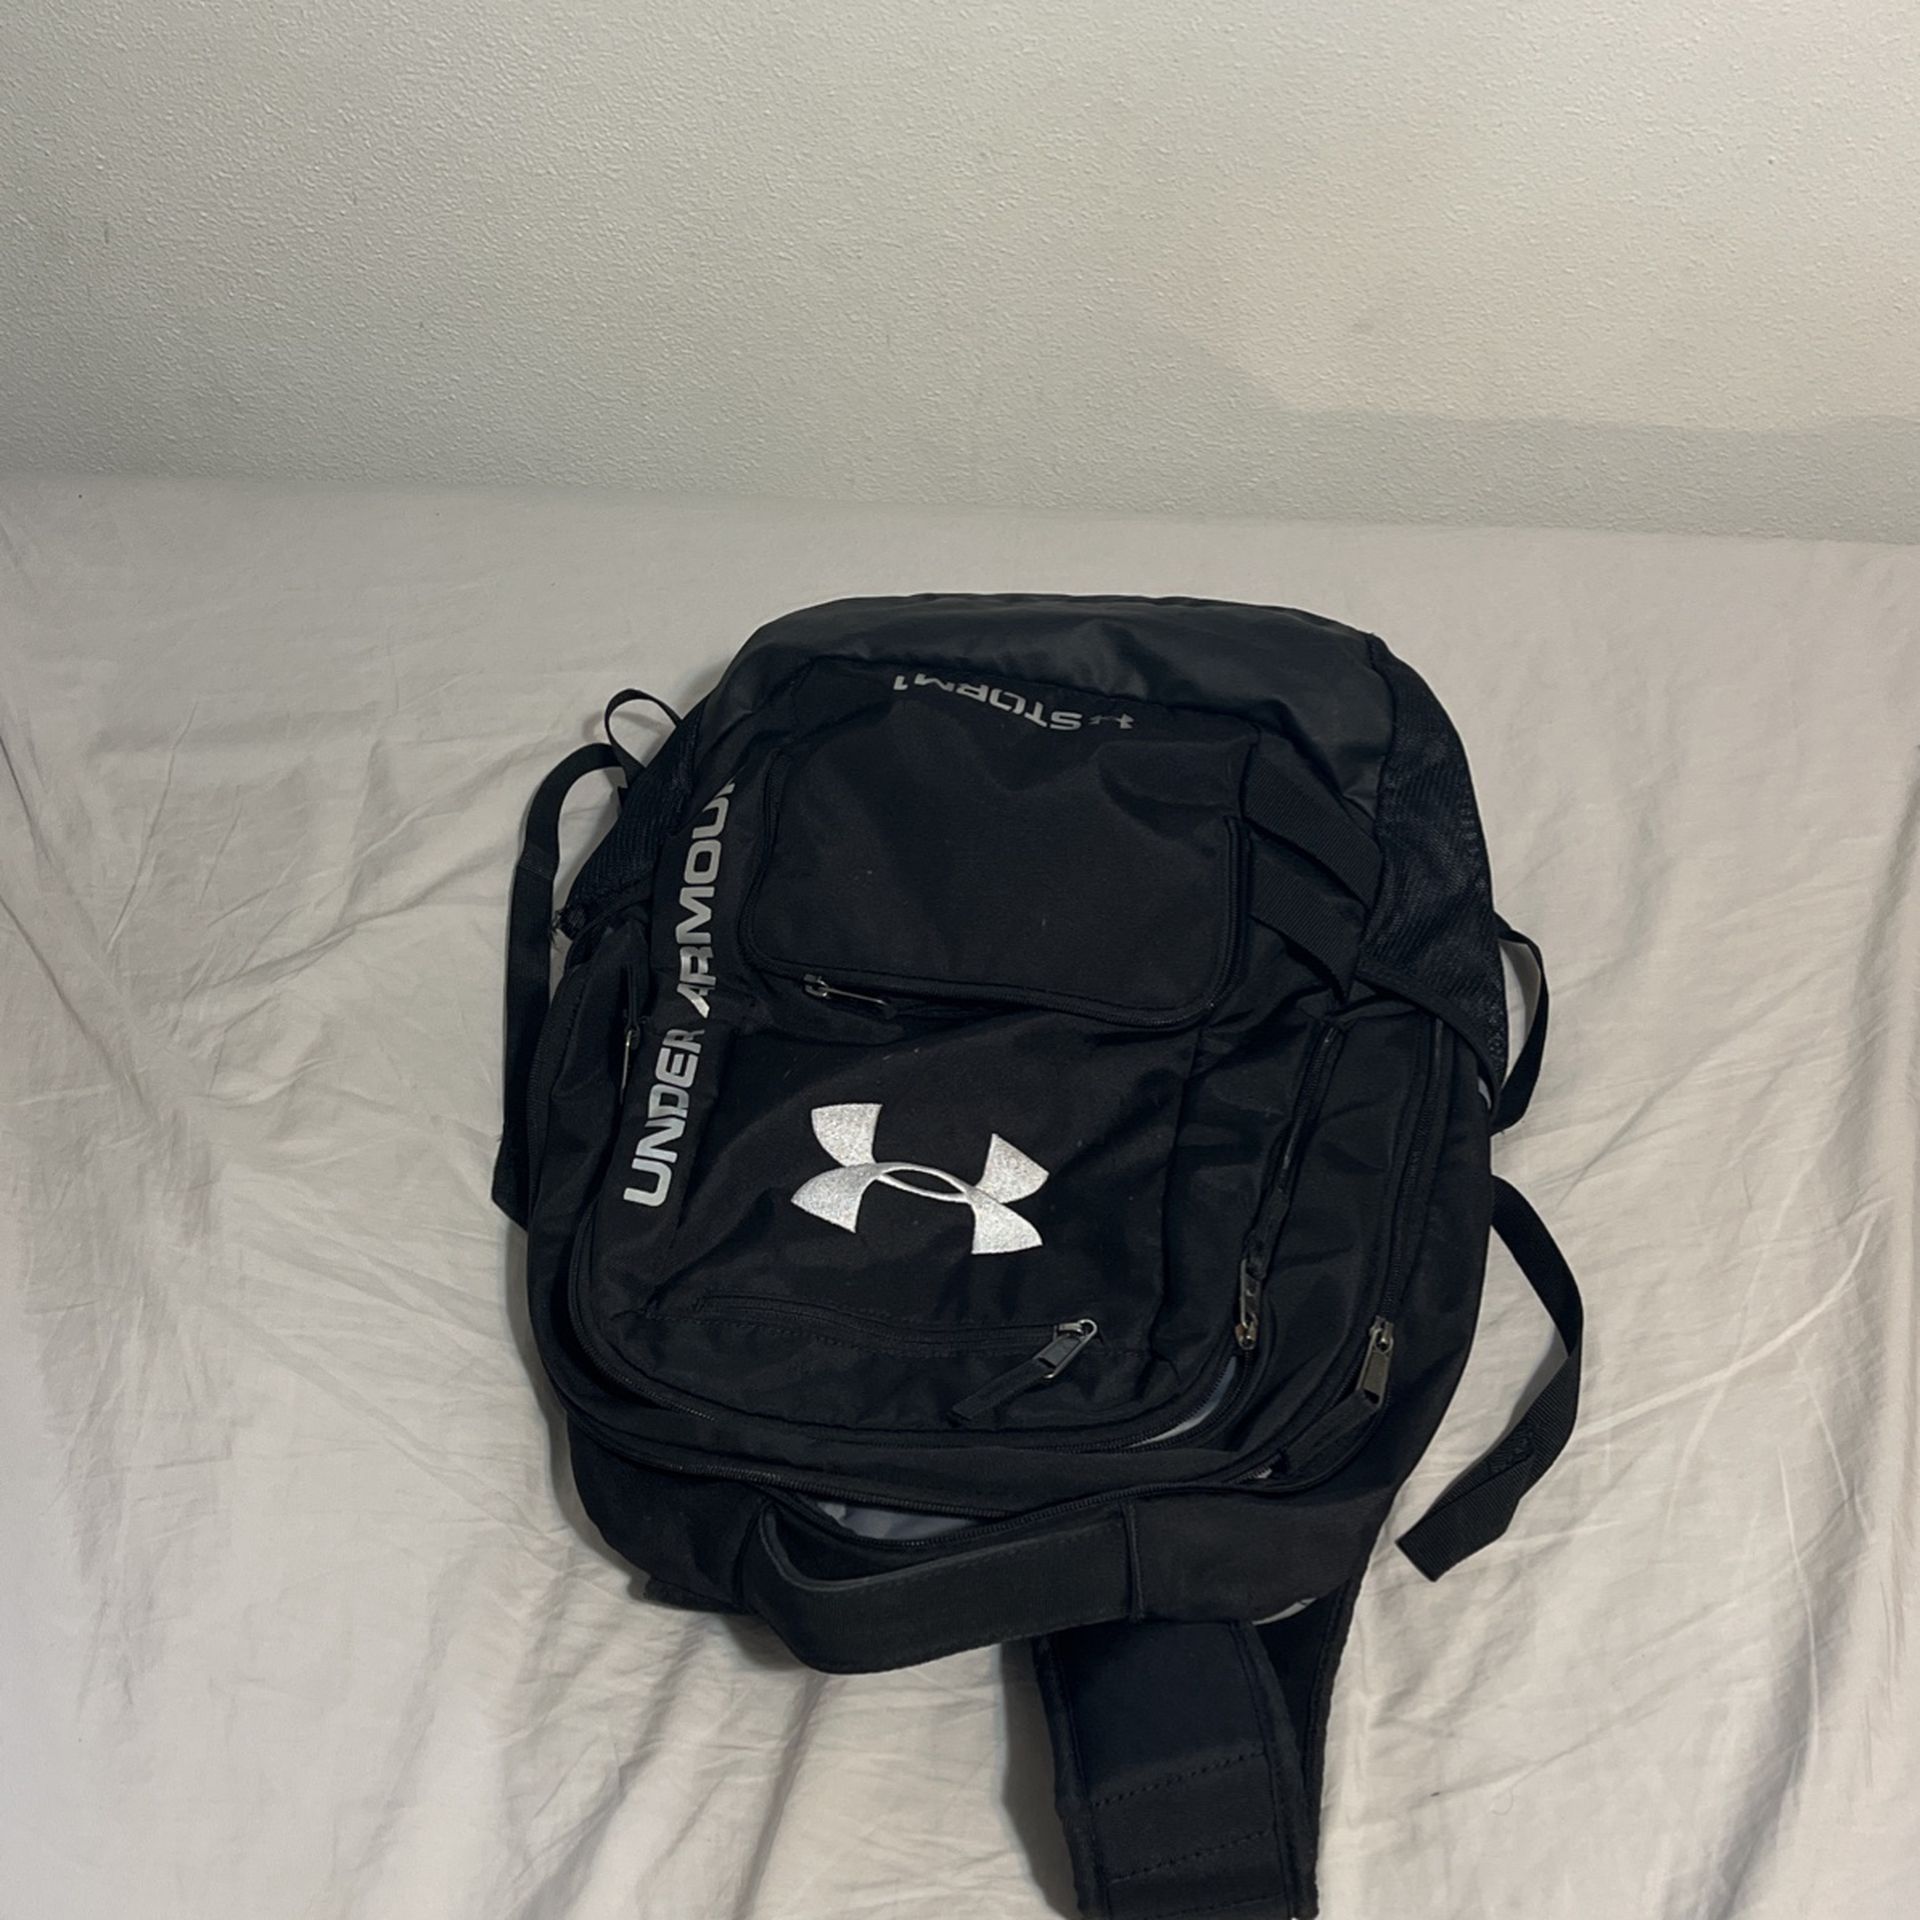 Under Armour Storm Backpack